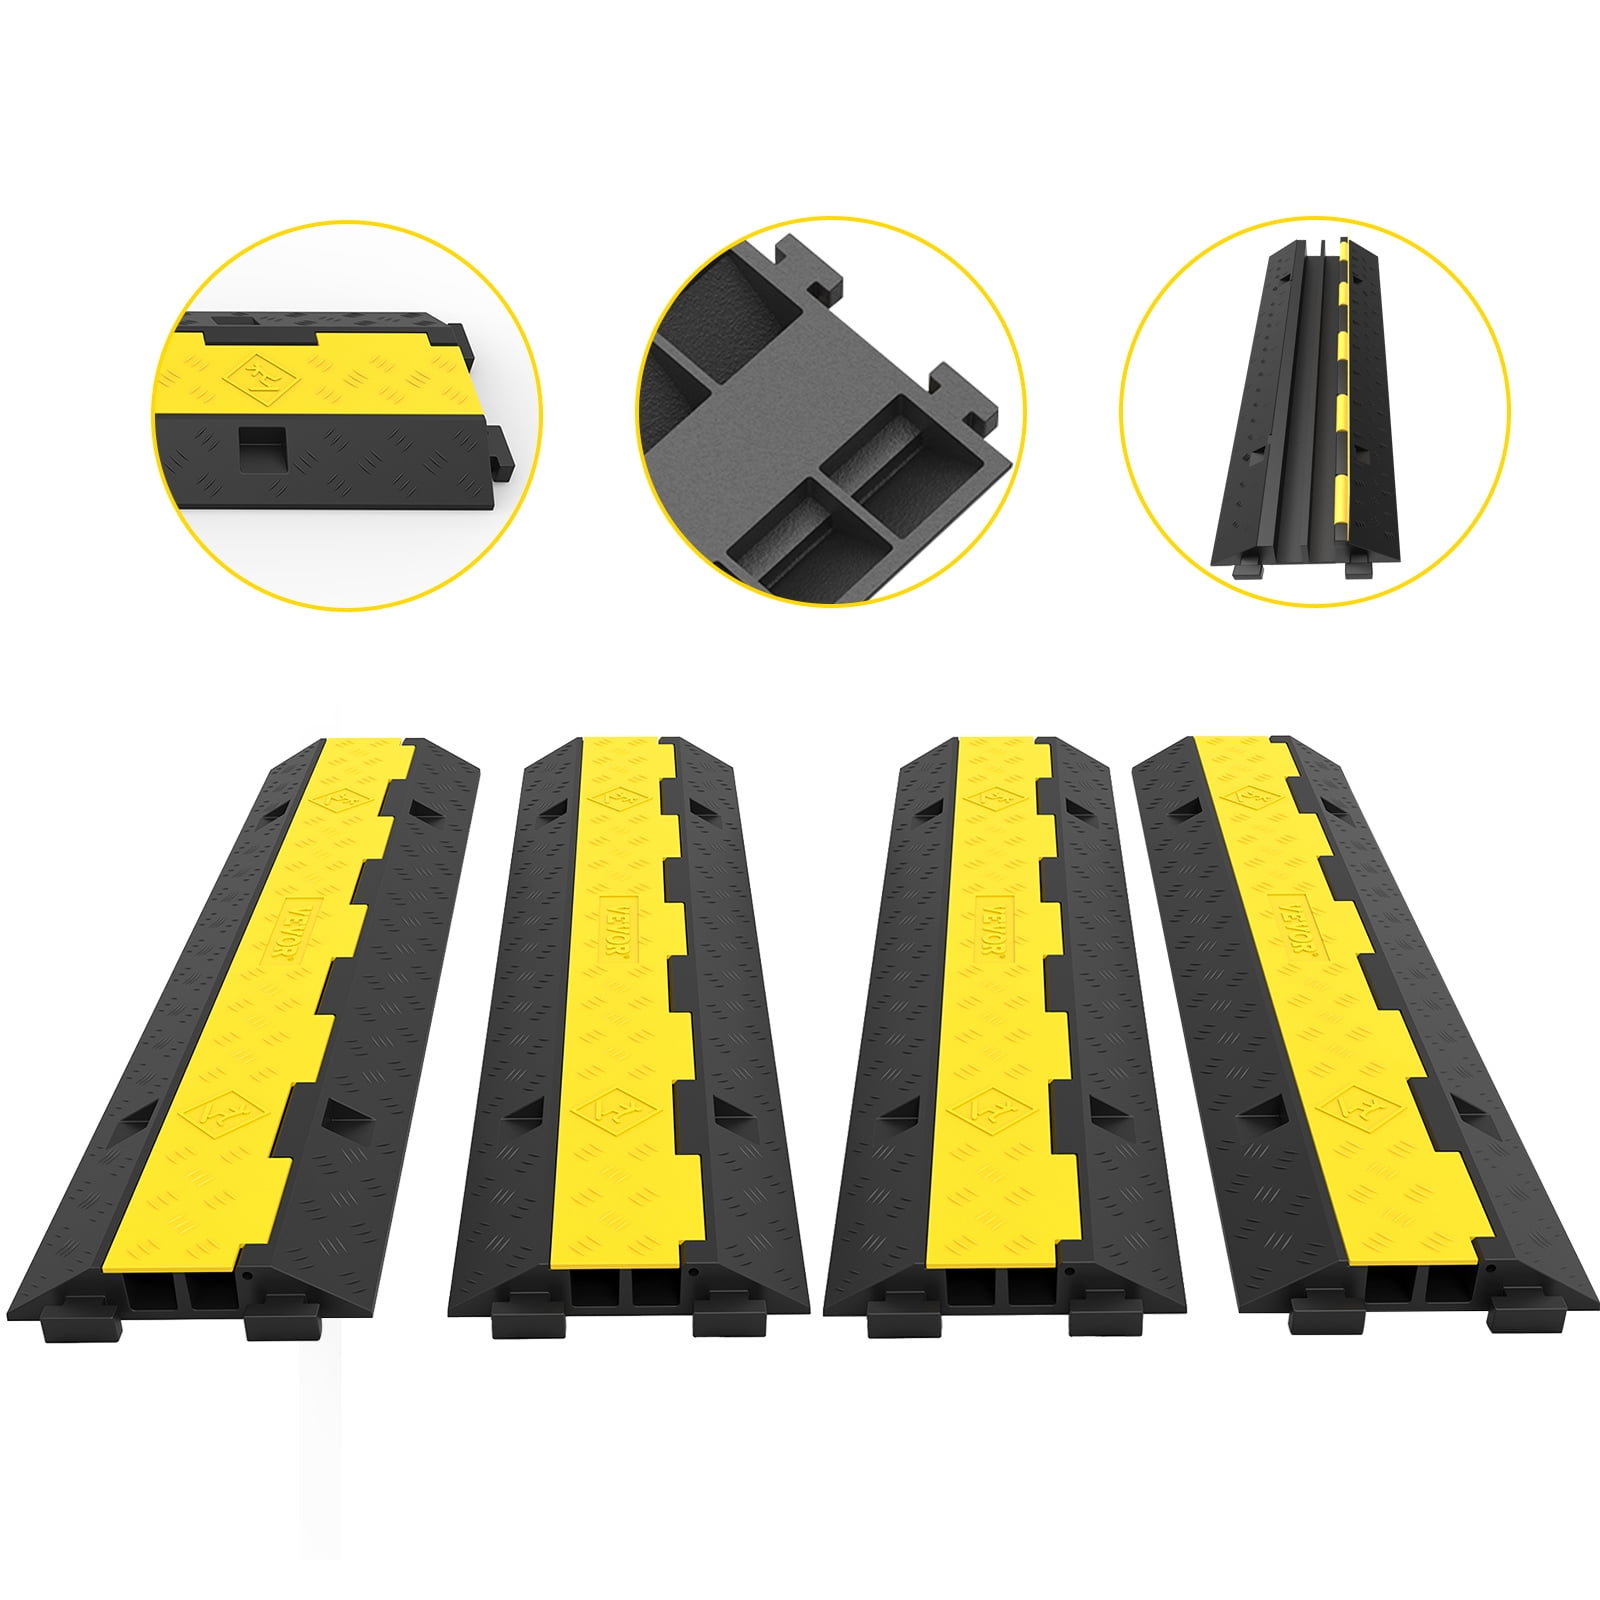 CXRCY Cable Ramp 1 Pack of 5 Channel PVC Rubber Cable Protector,18000lbs Capacity Heavy Duty Speed Bumps Hose Cord Protector Ramps for Wire/Hose/Pipe Hider Driveway &Indoor